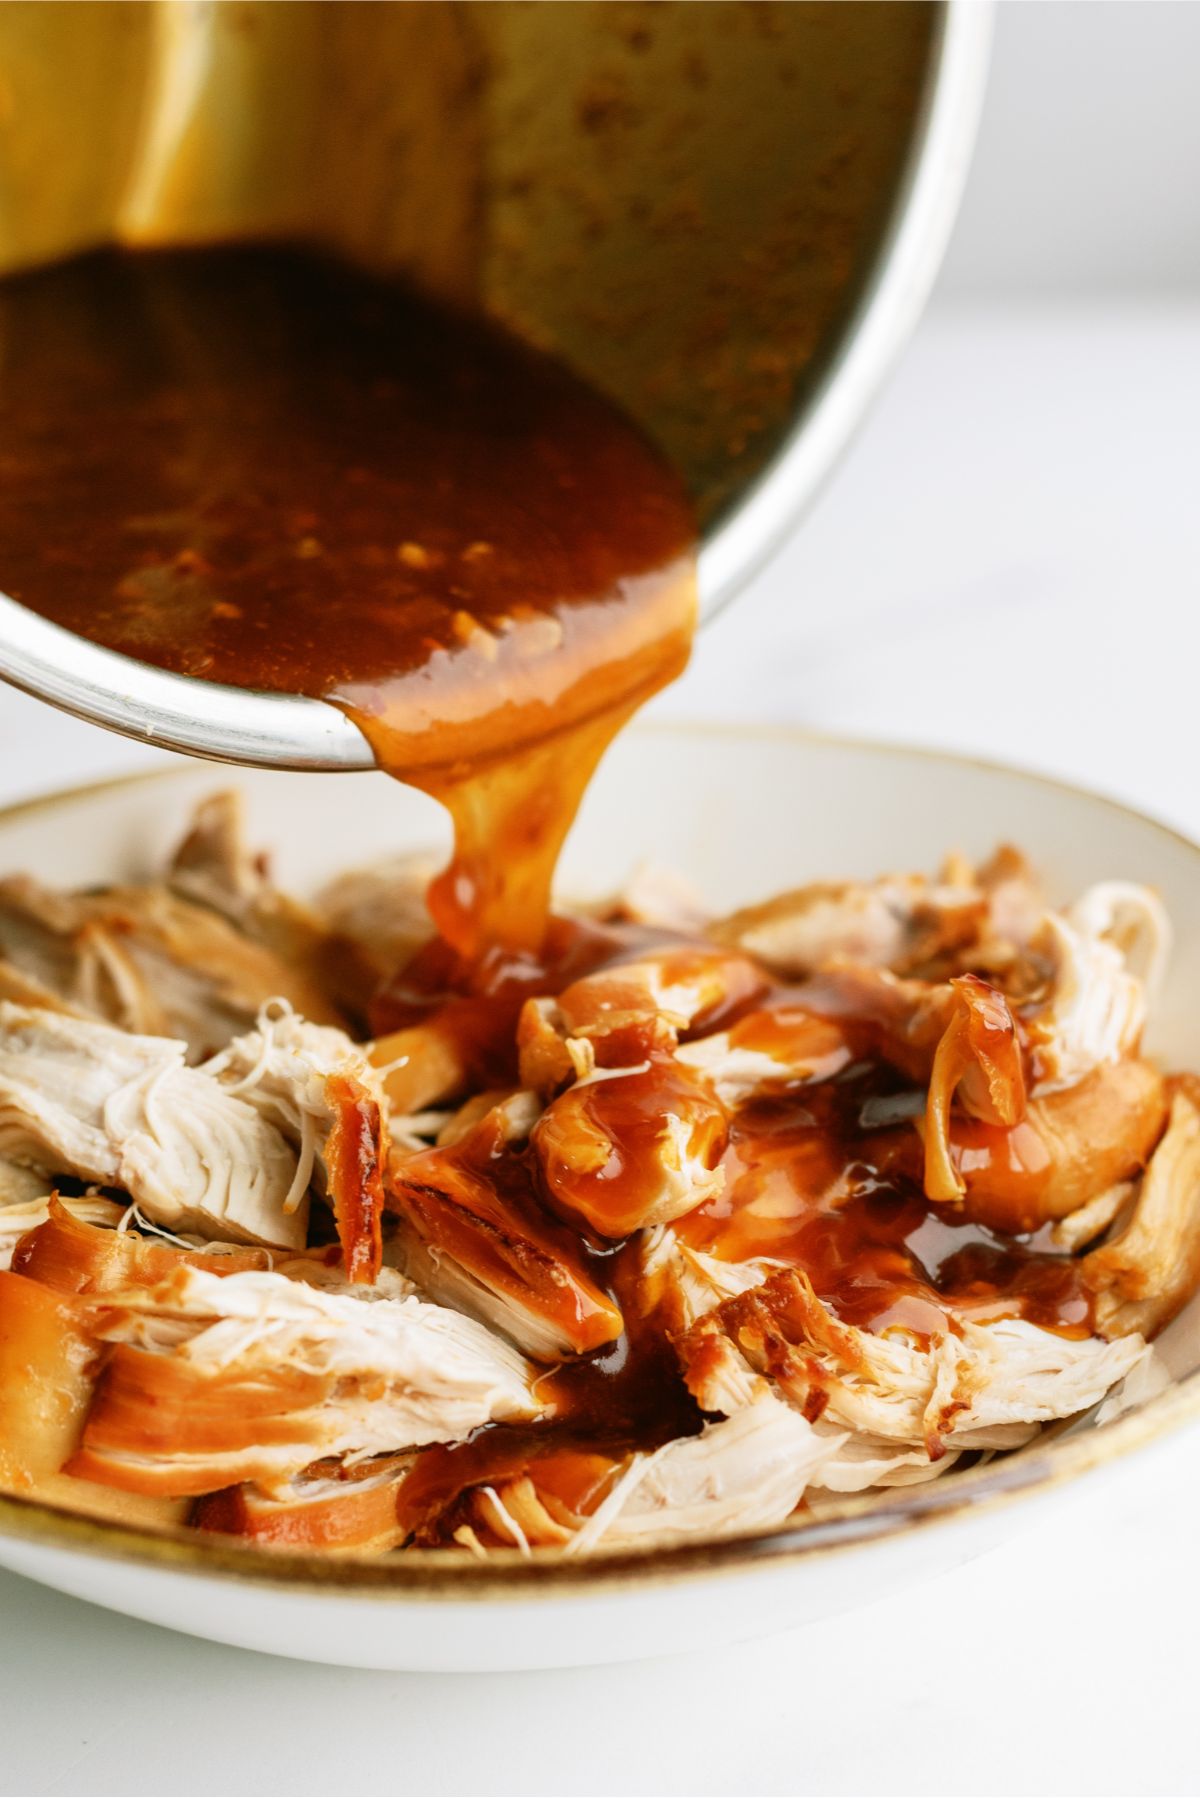 Pouring thickened sauce over shredded chicken